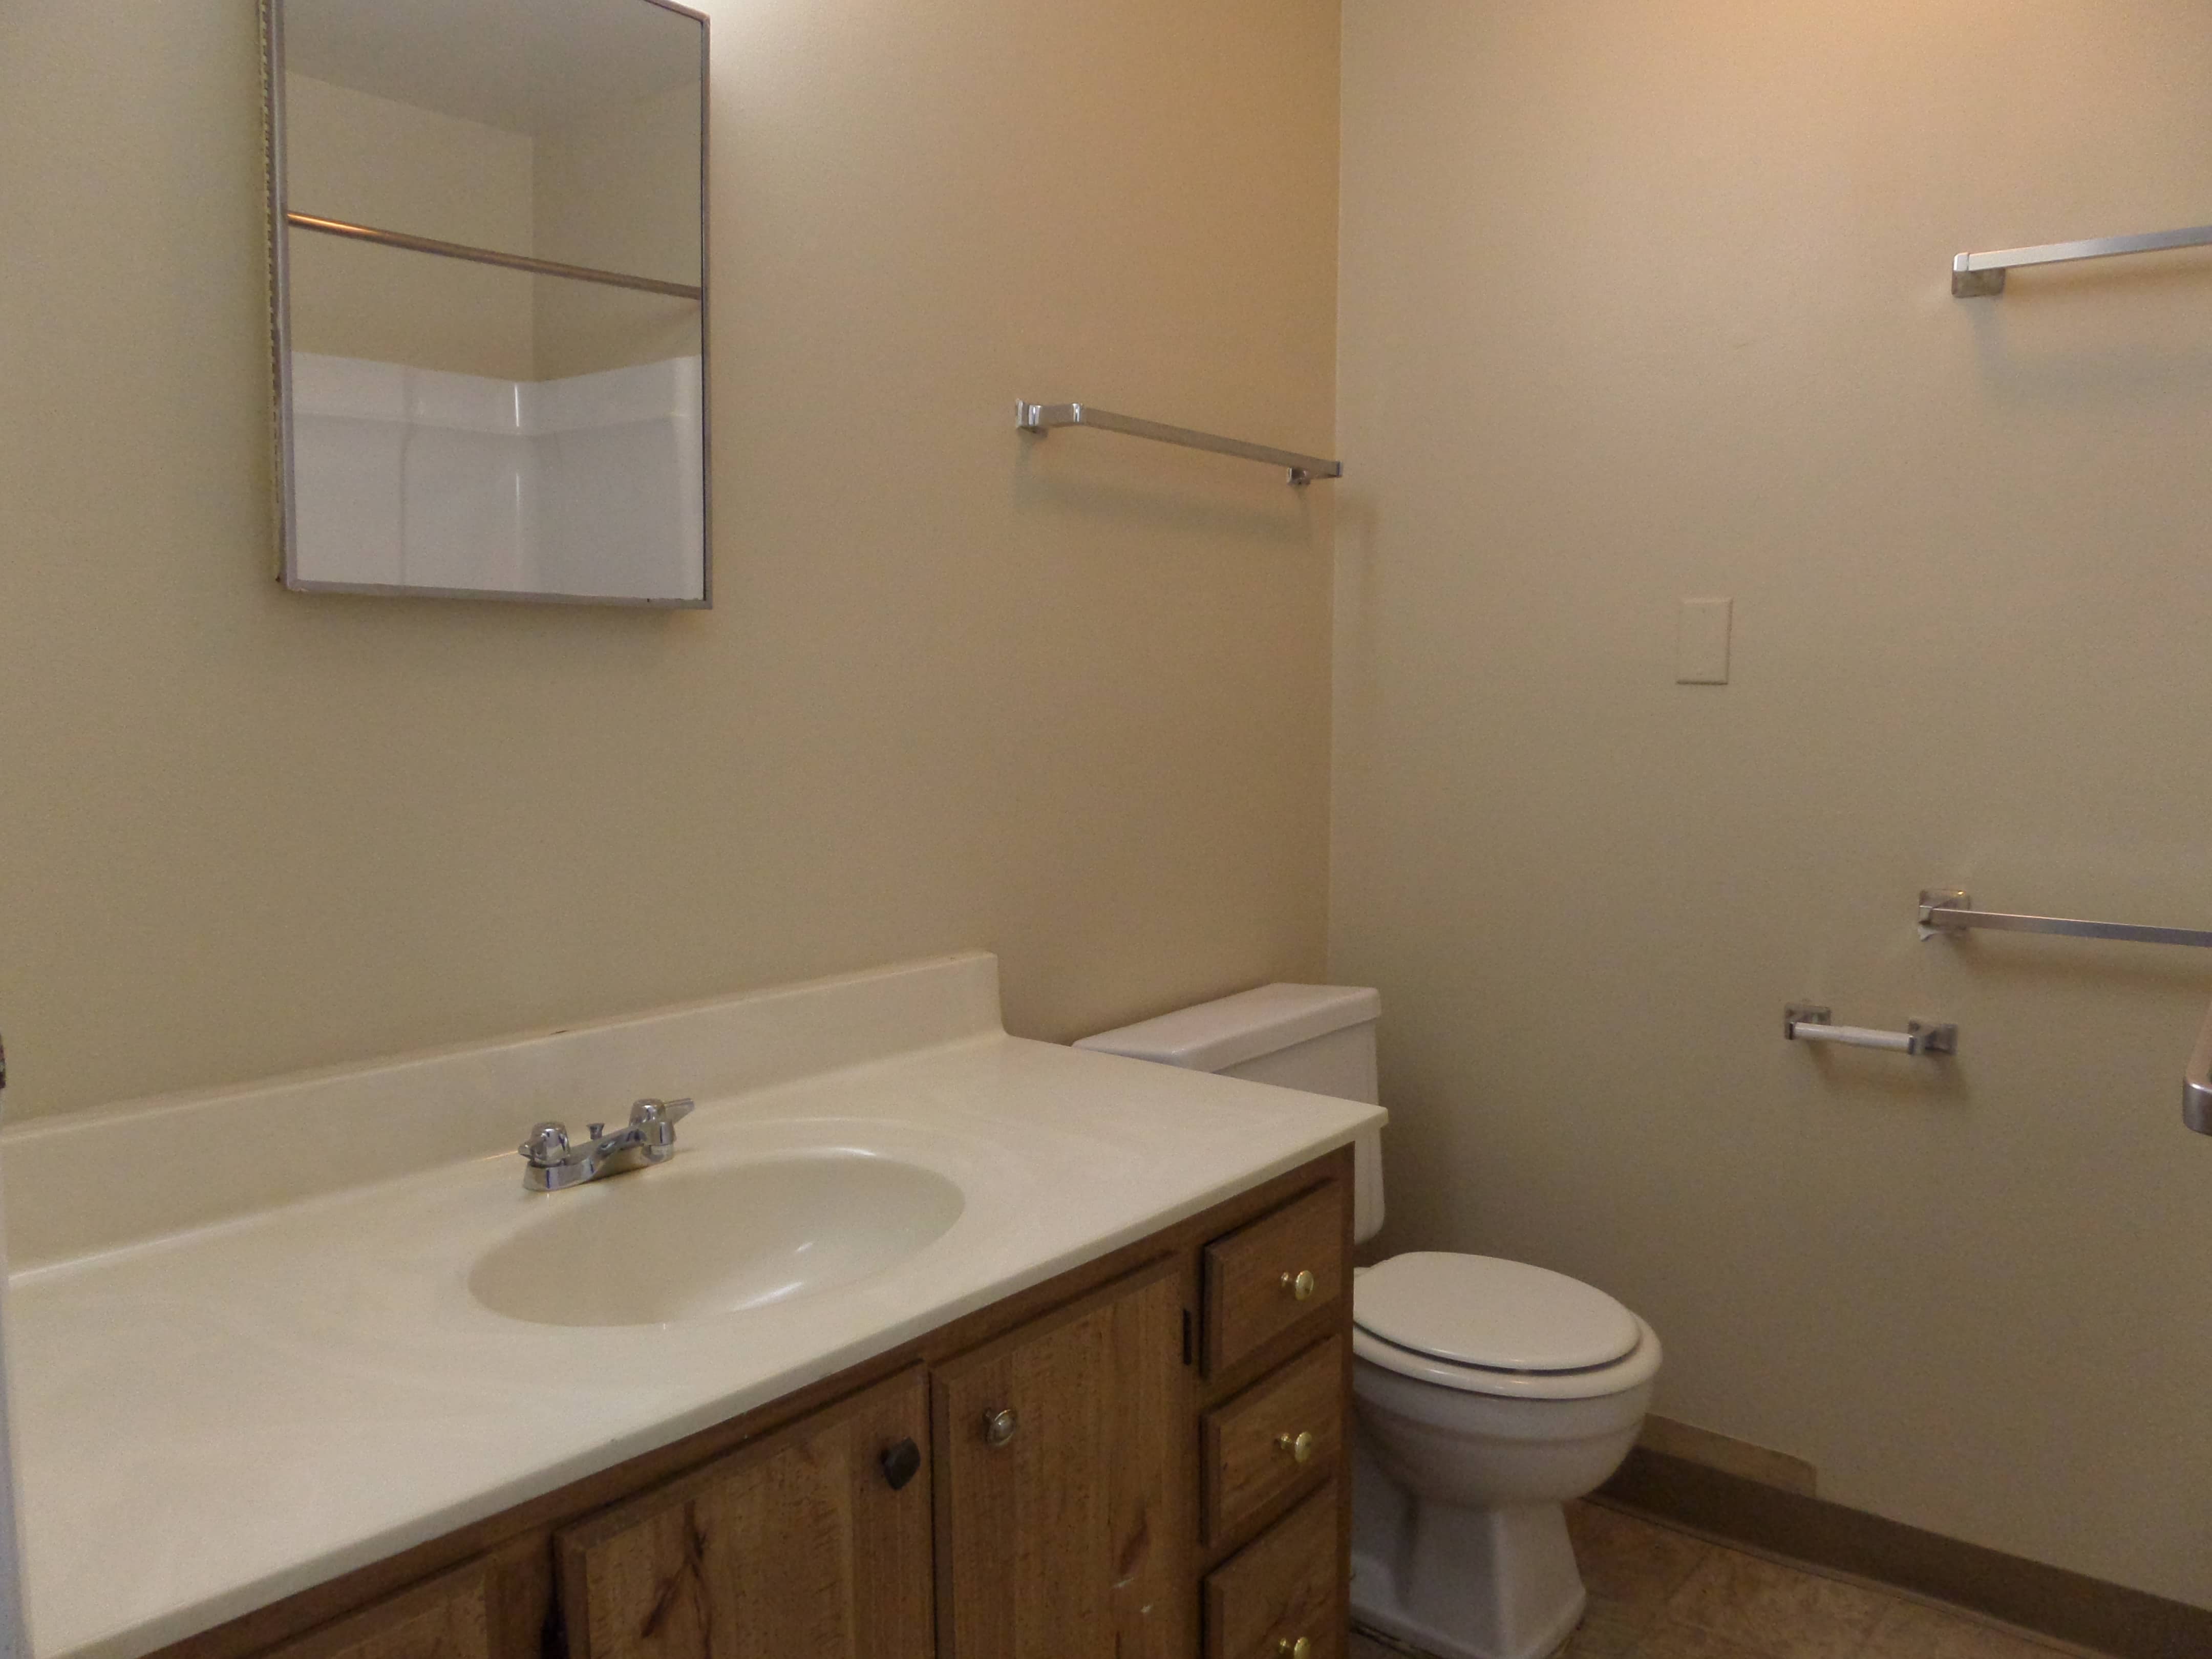 Shared bathroom with sink and vanity